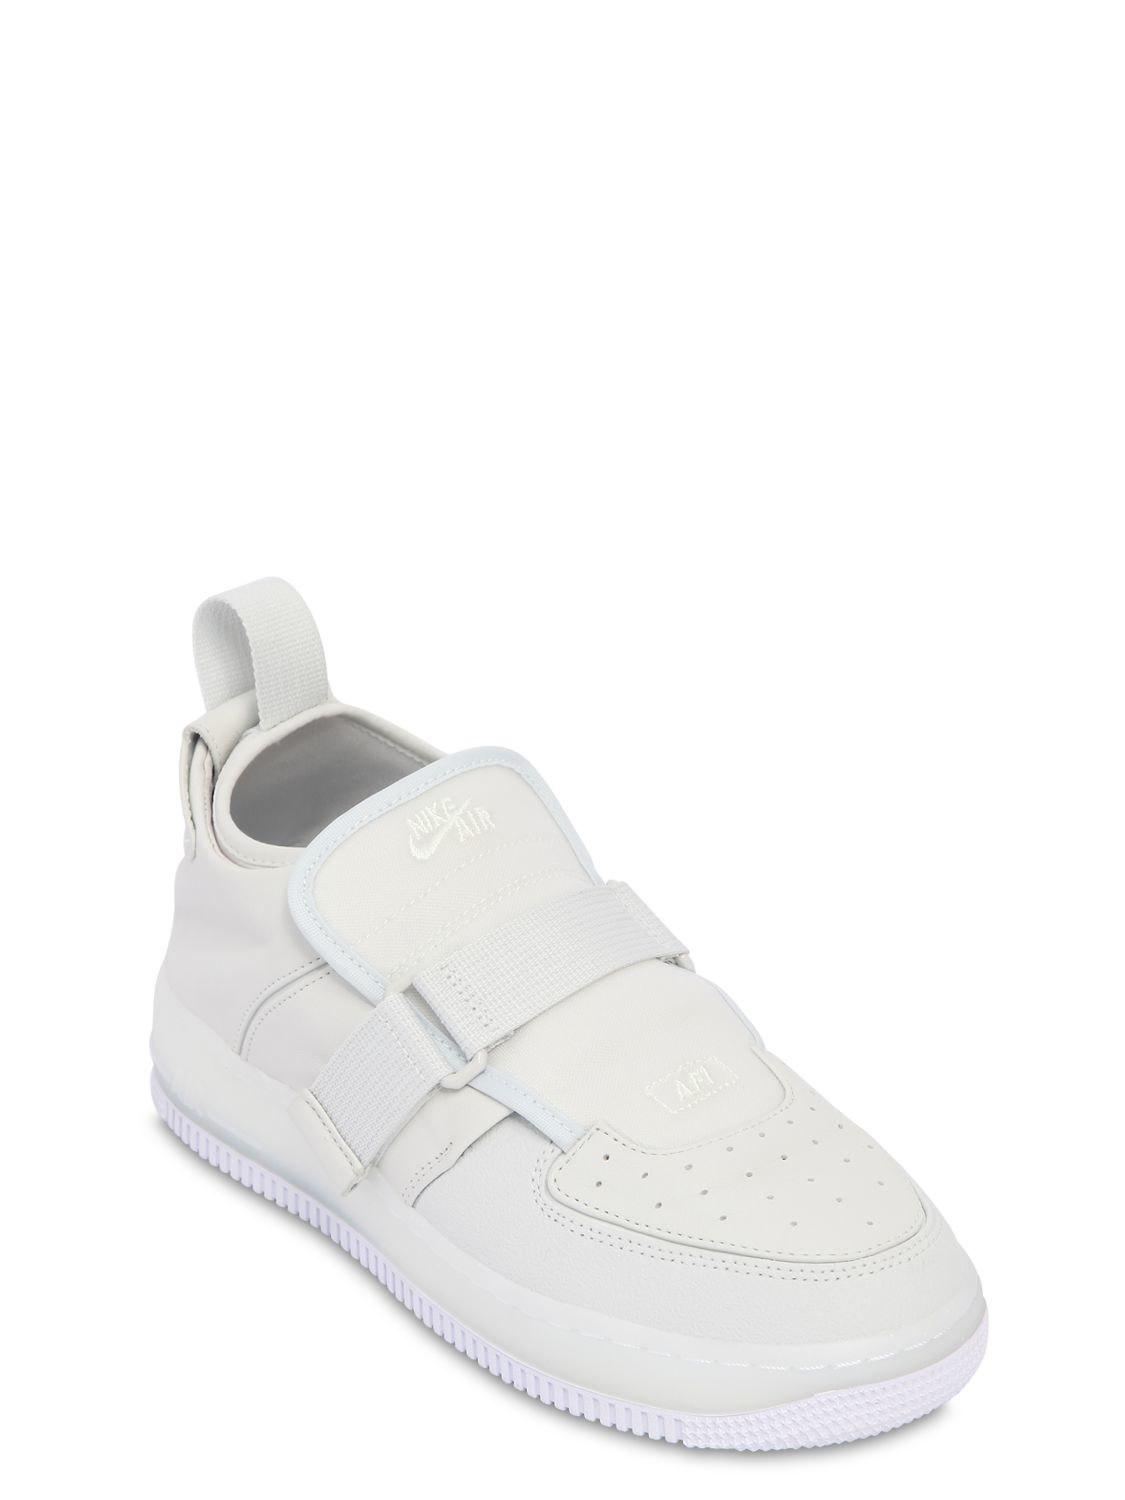 Nike Air Force 1 Explorer Xx Sneakers in White | Lyst